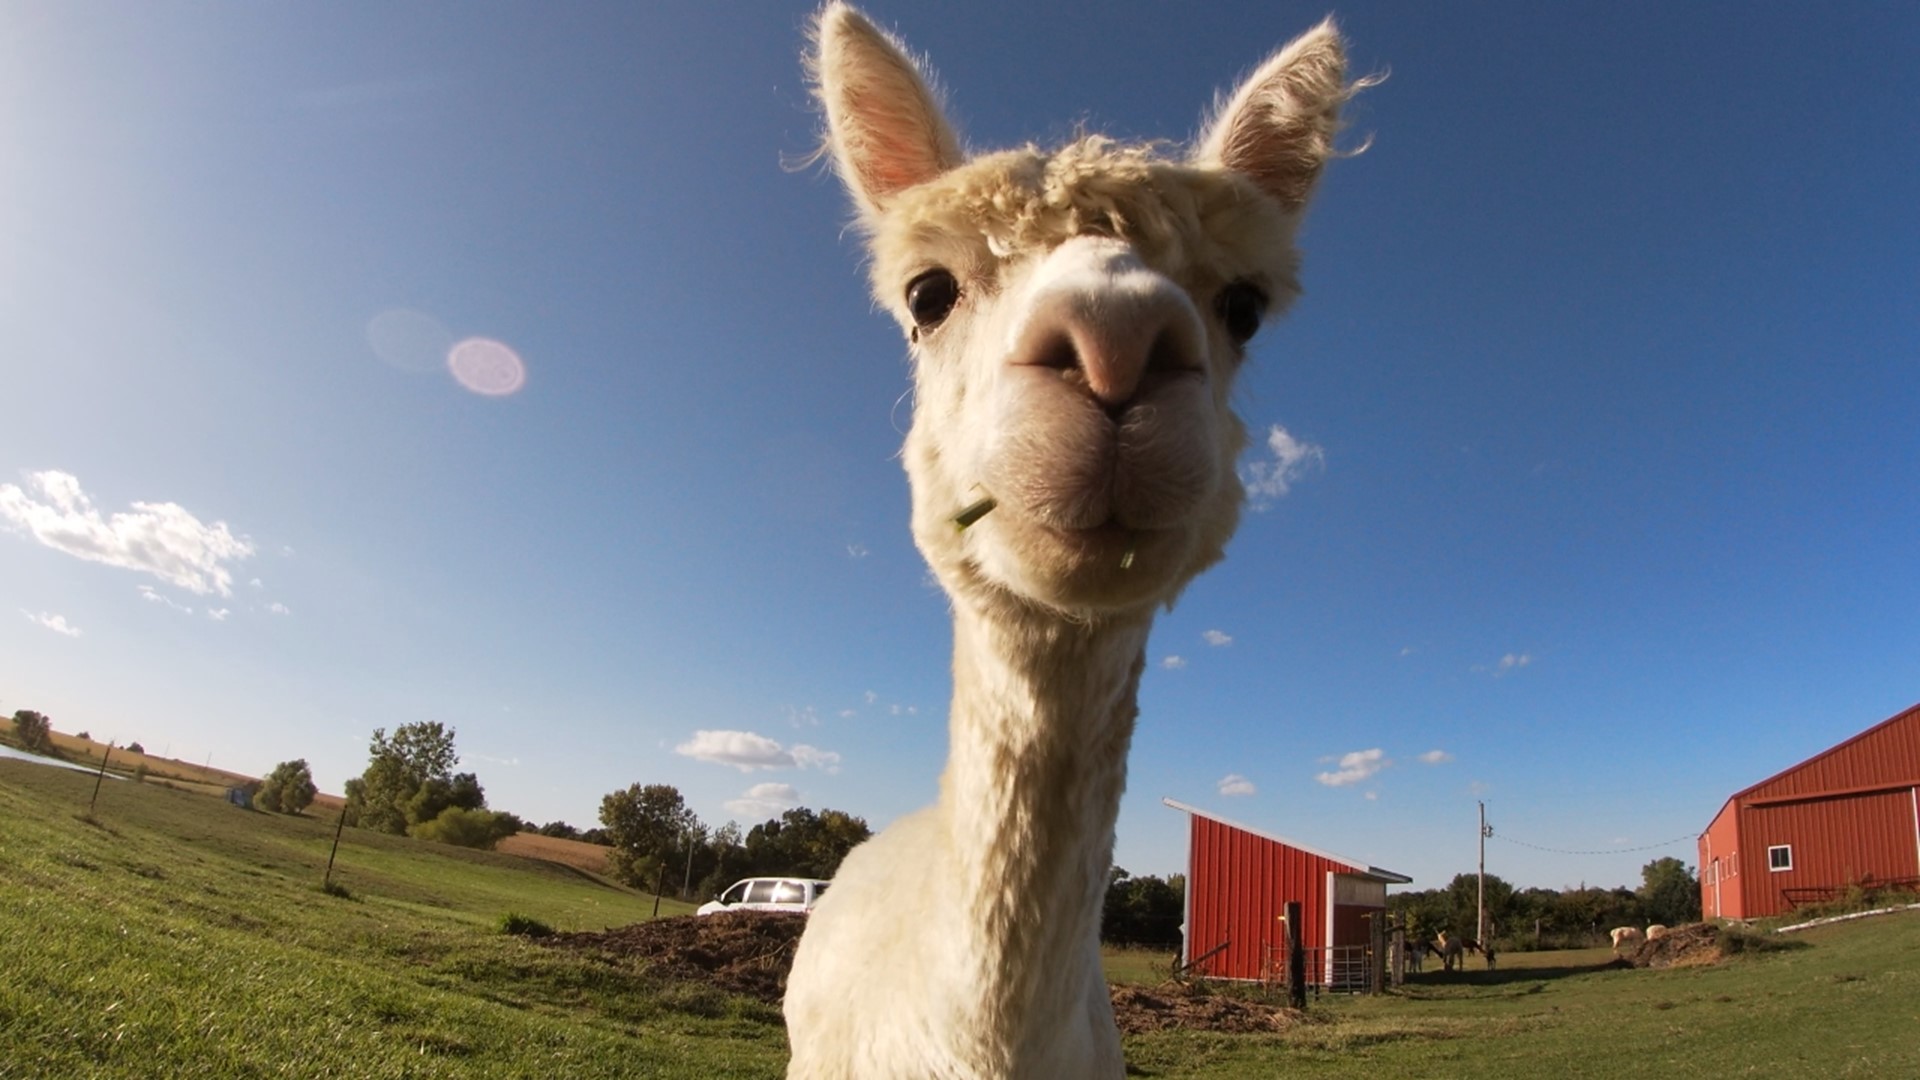 In 2011 a Rock Island woman moved to Plymouth, Illinois to raise alpacas.